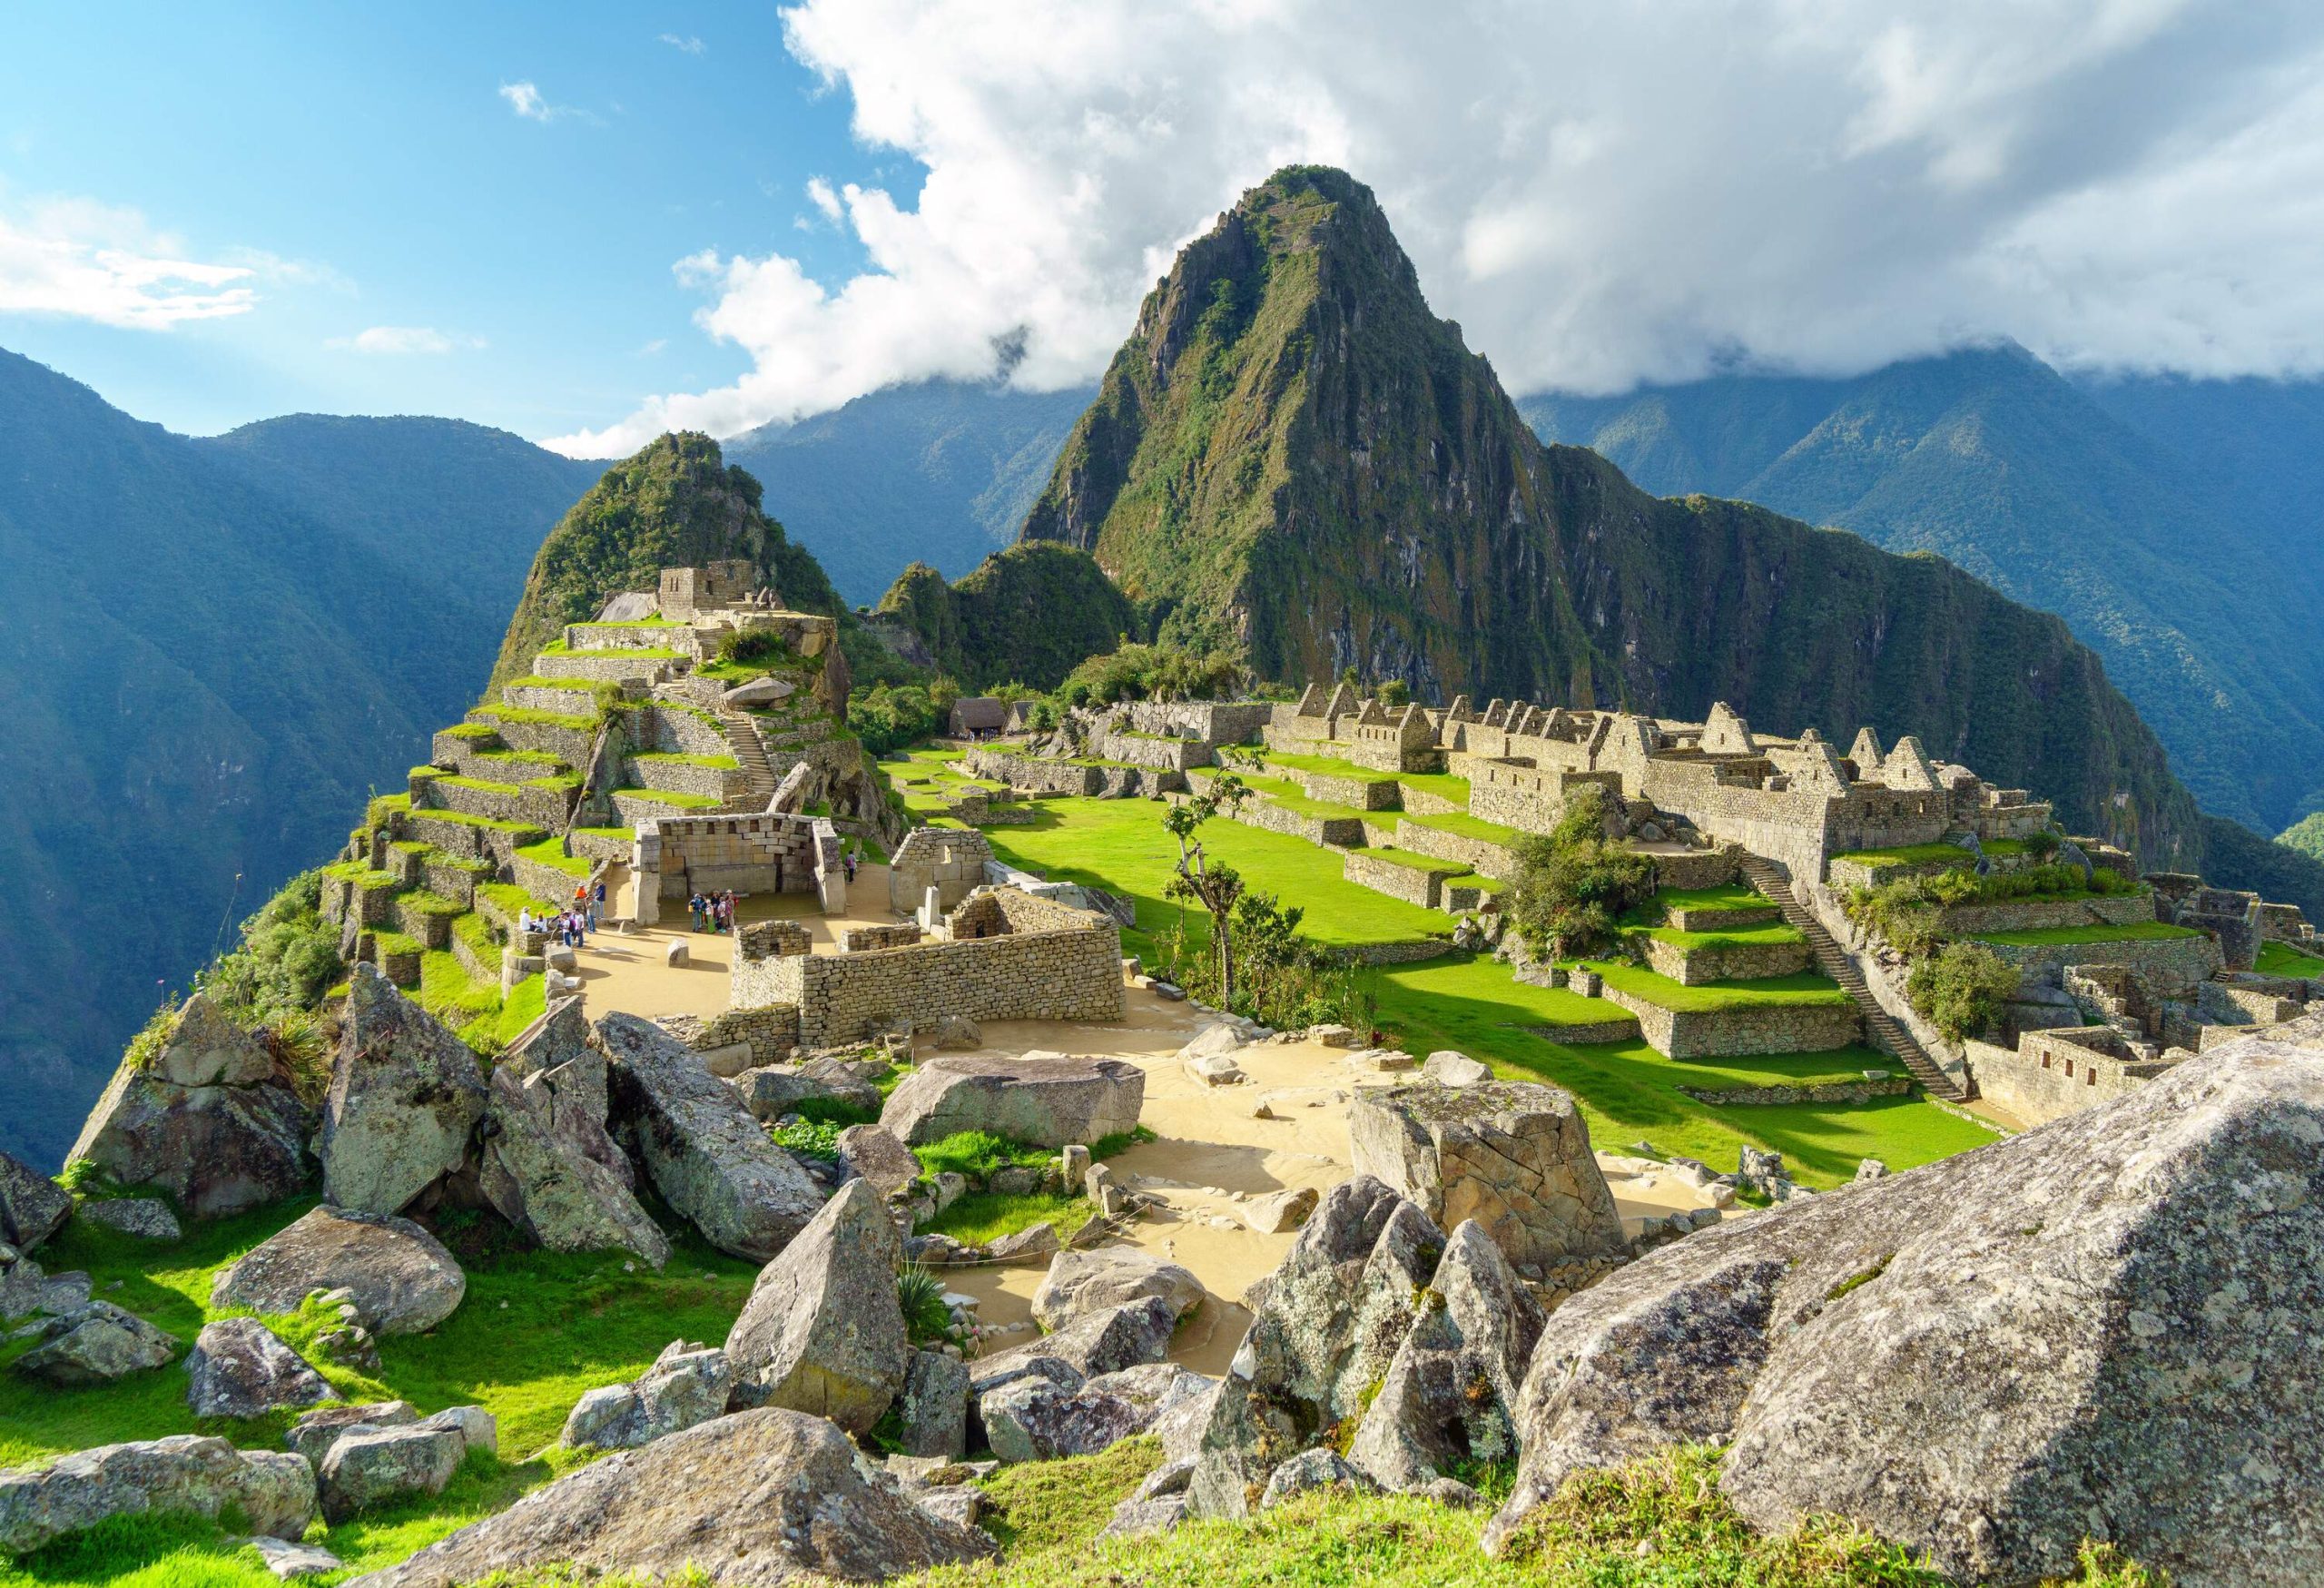 Boulders and rocks in the foreground offer a rugged perspective as the iconic Machu Picchu emerges on a vibrant green landscape, embraced by majestic mountains in the backdrop.